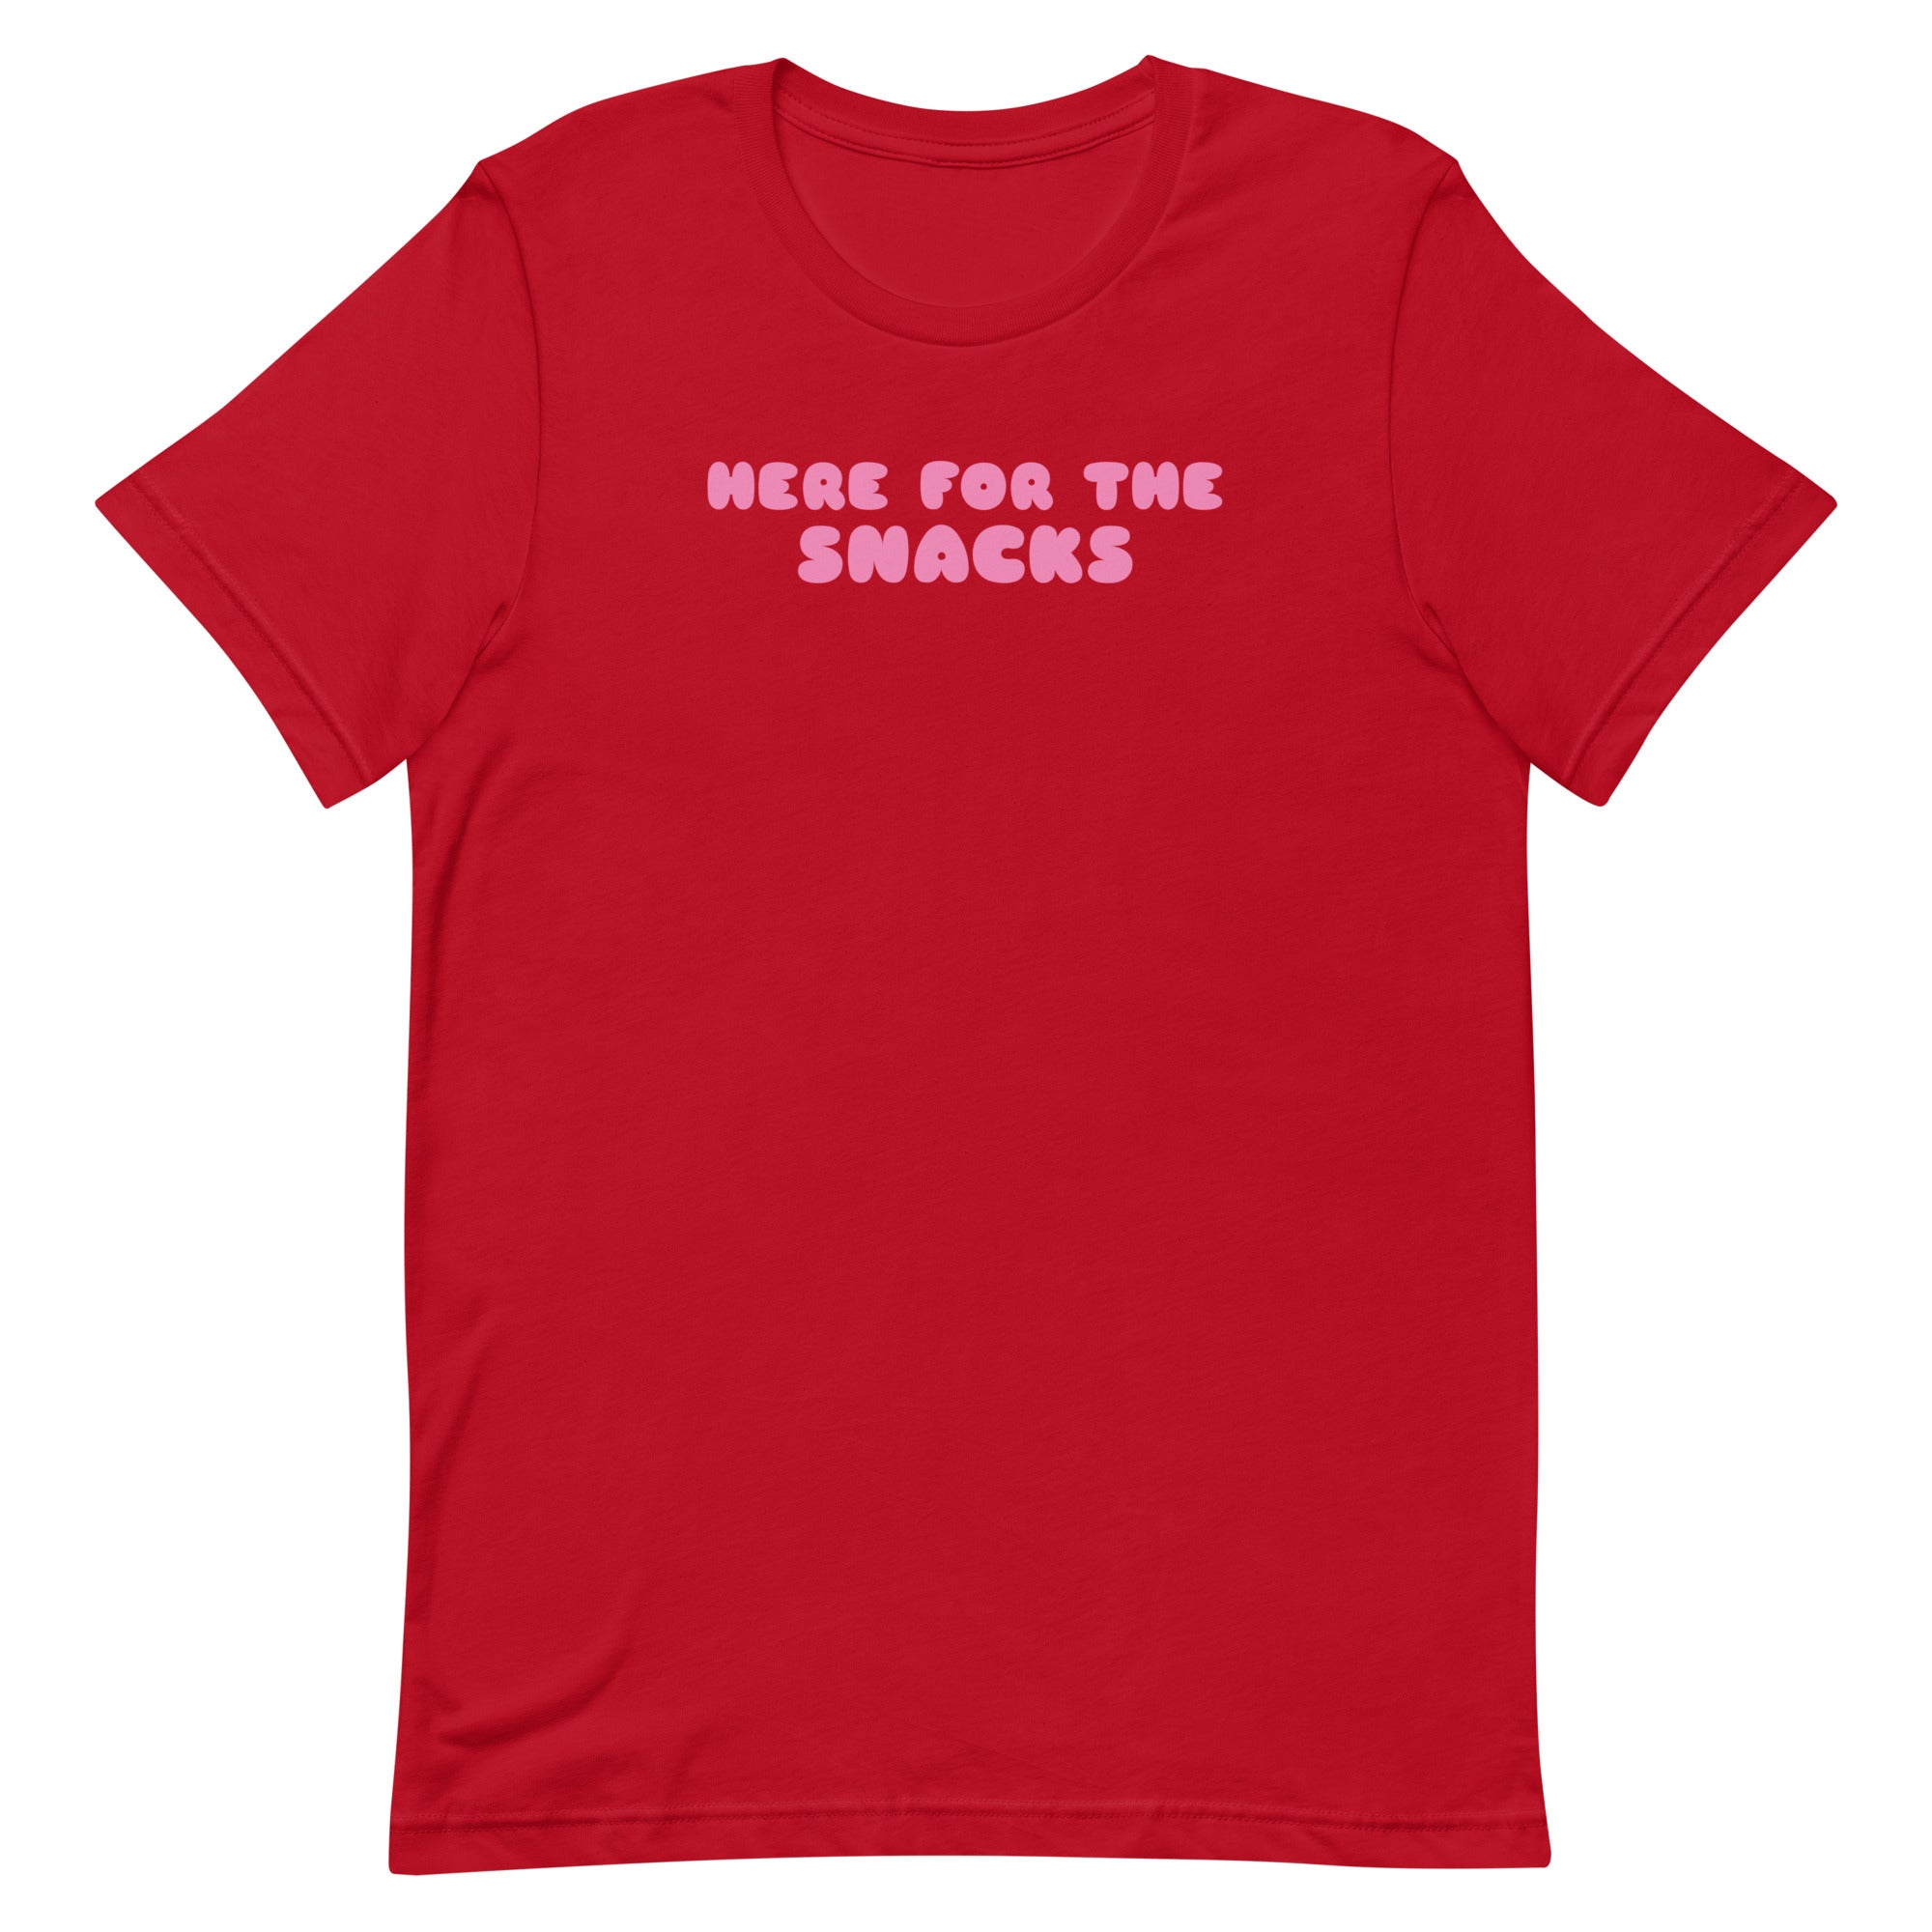 "Here for the snacks" shirt